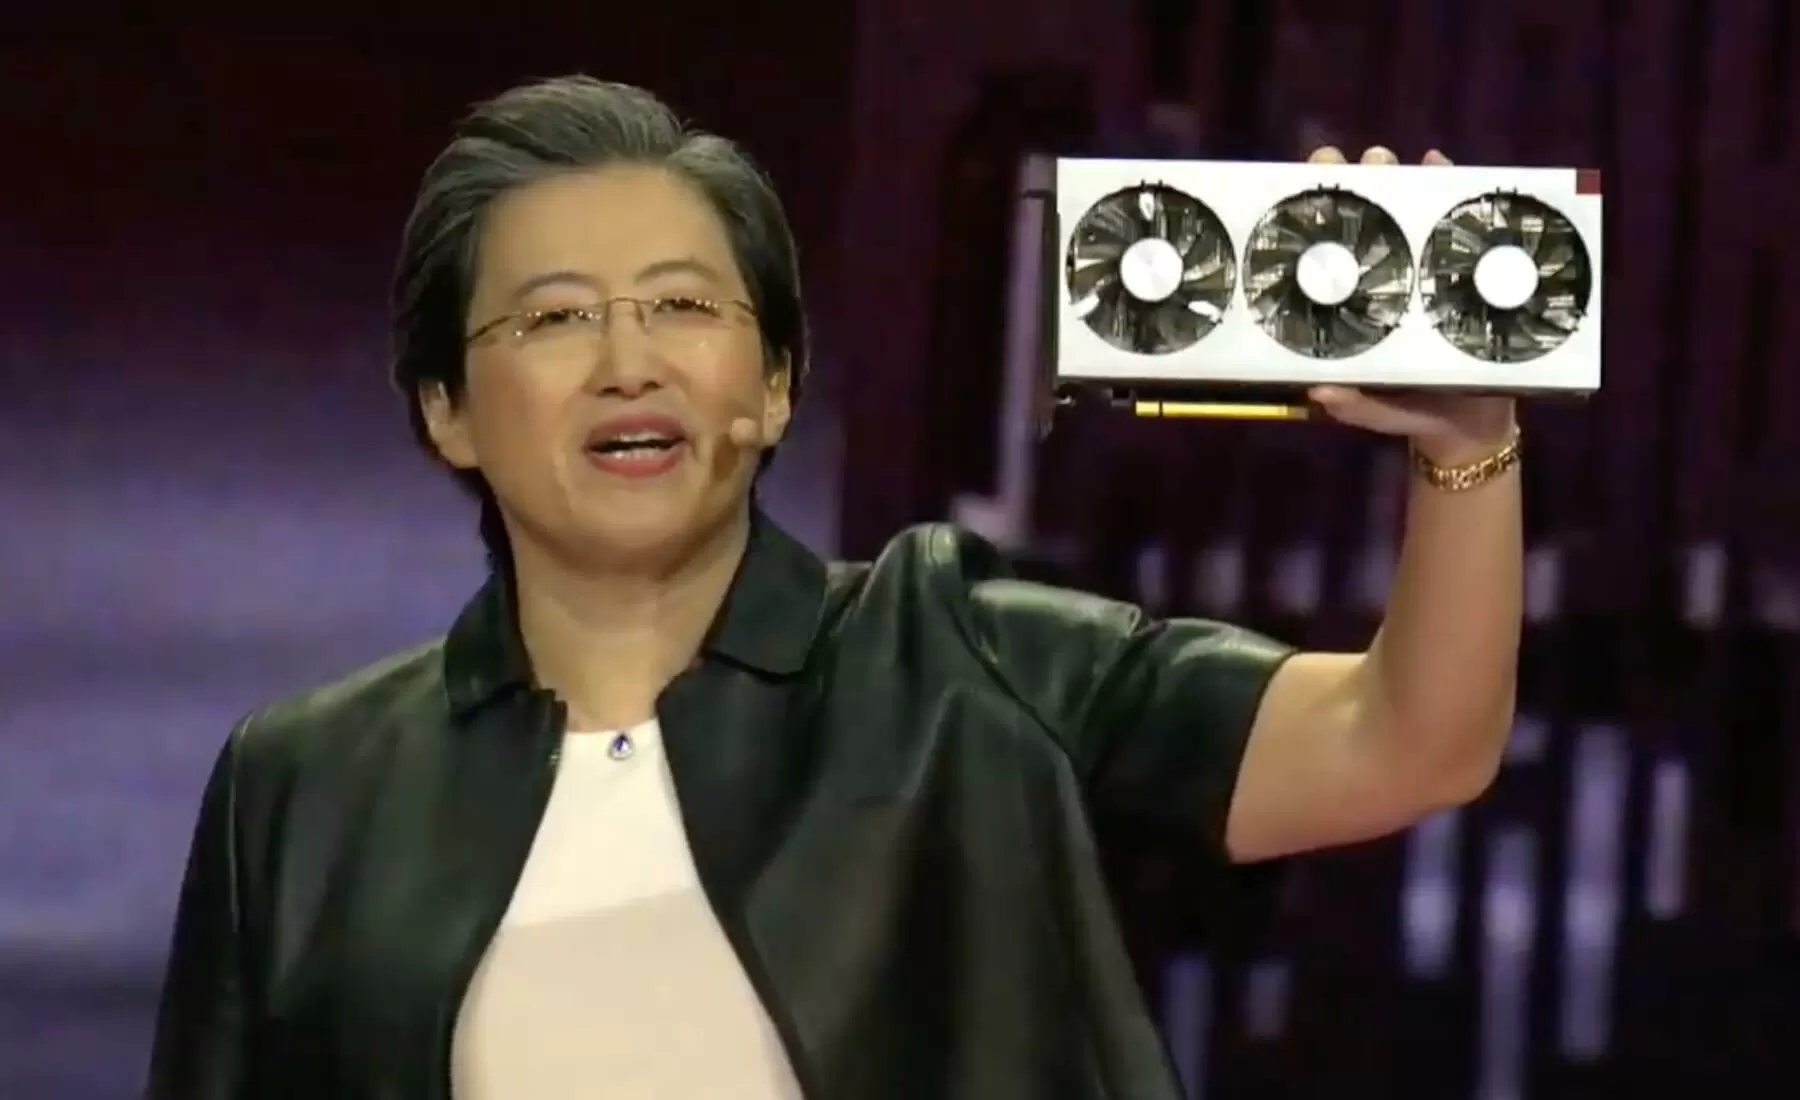 AMD CEO hints that high-end Navi GPUs and ray tracing may be coming to Radeon cards